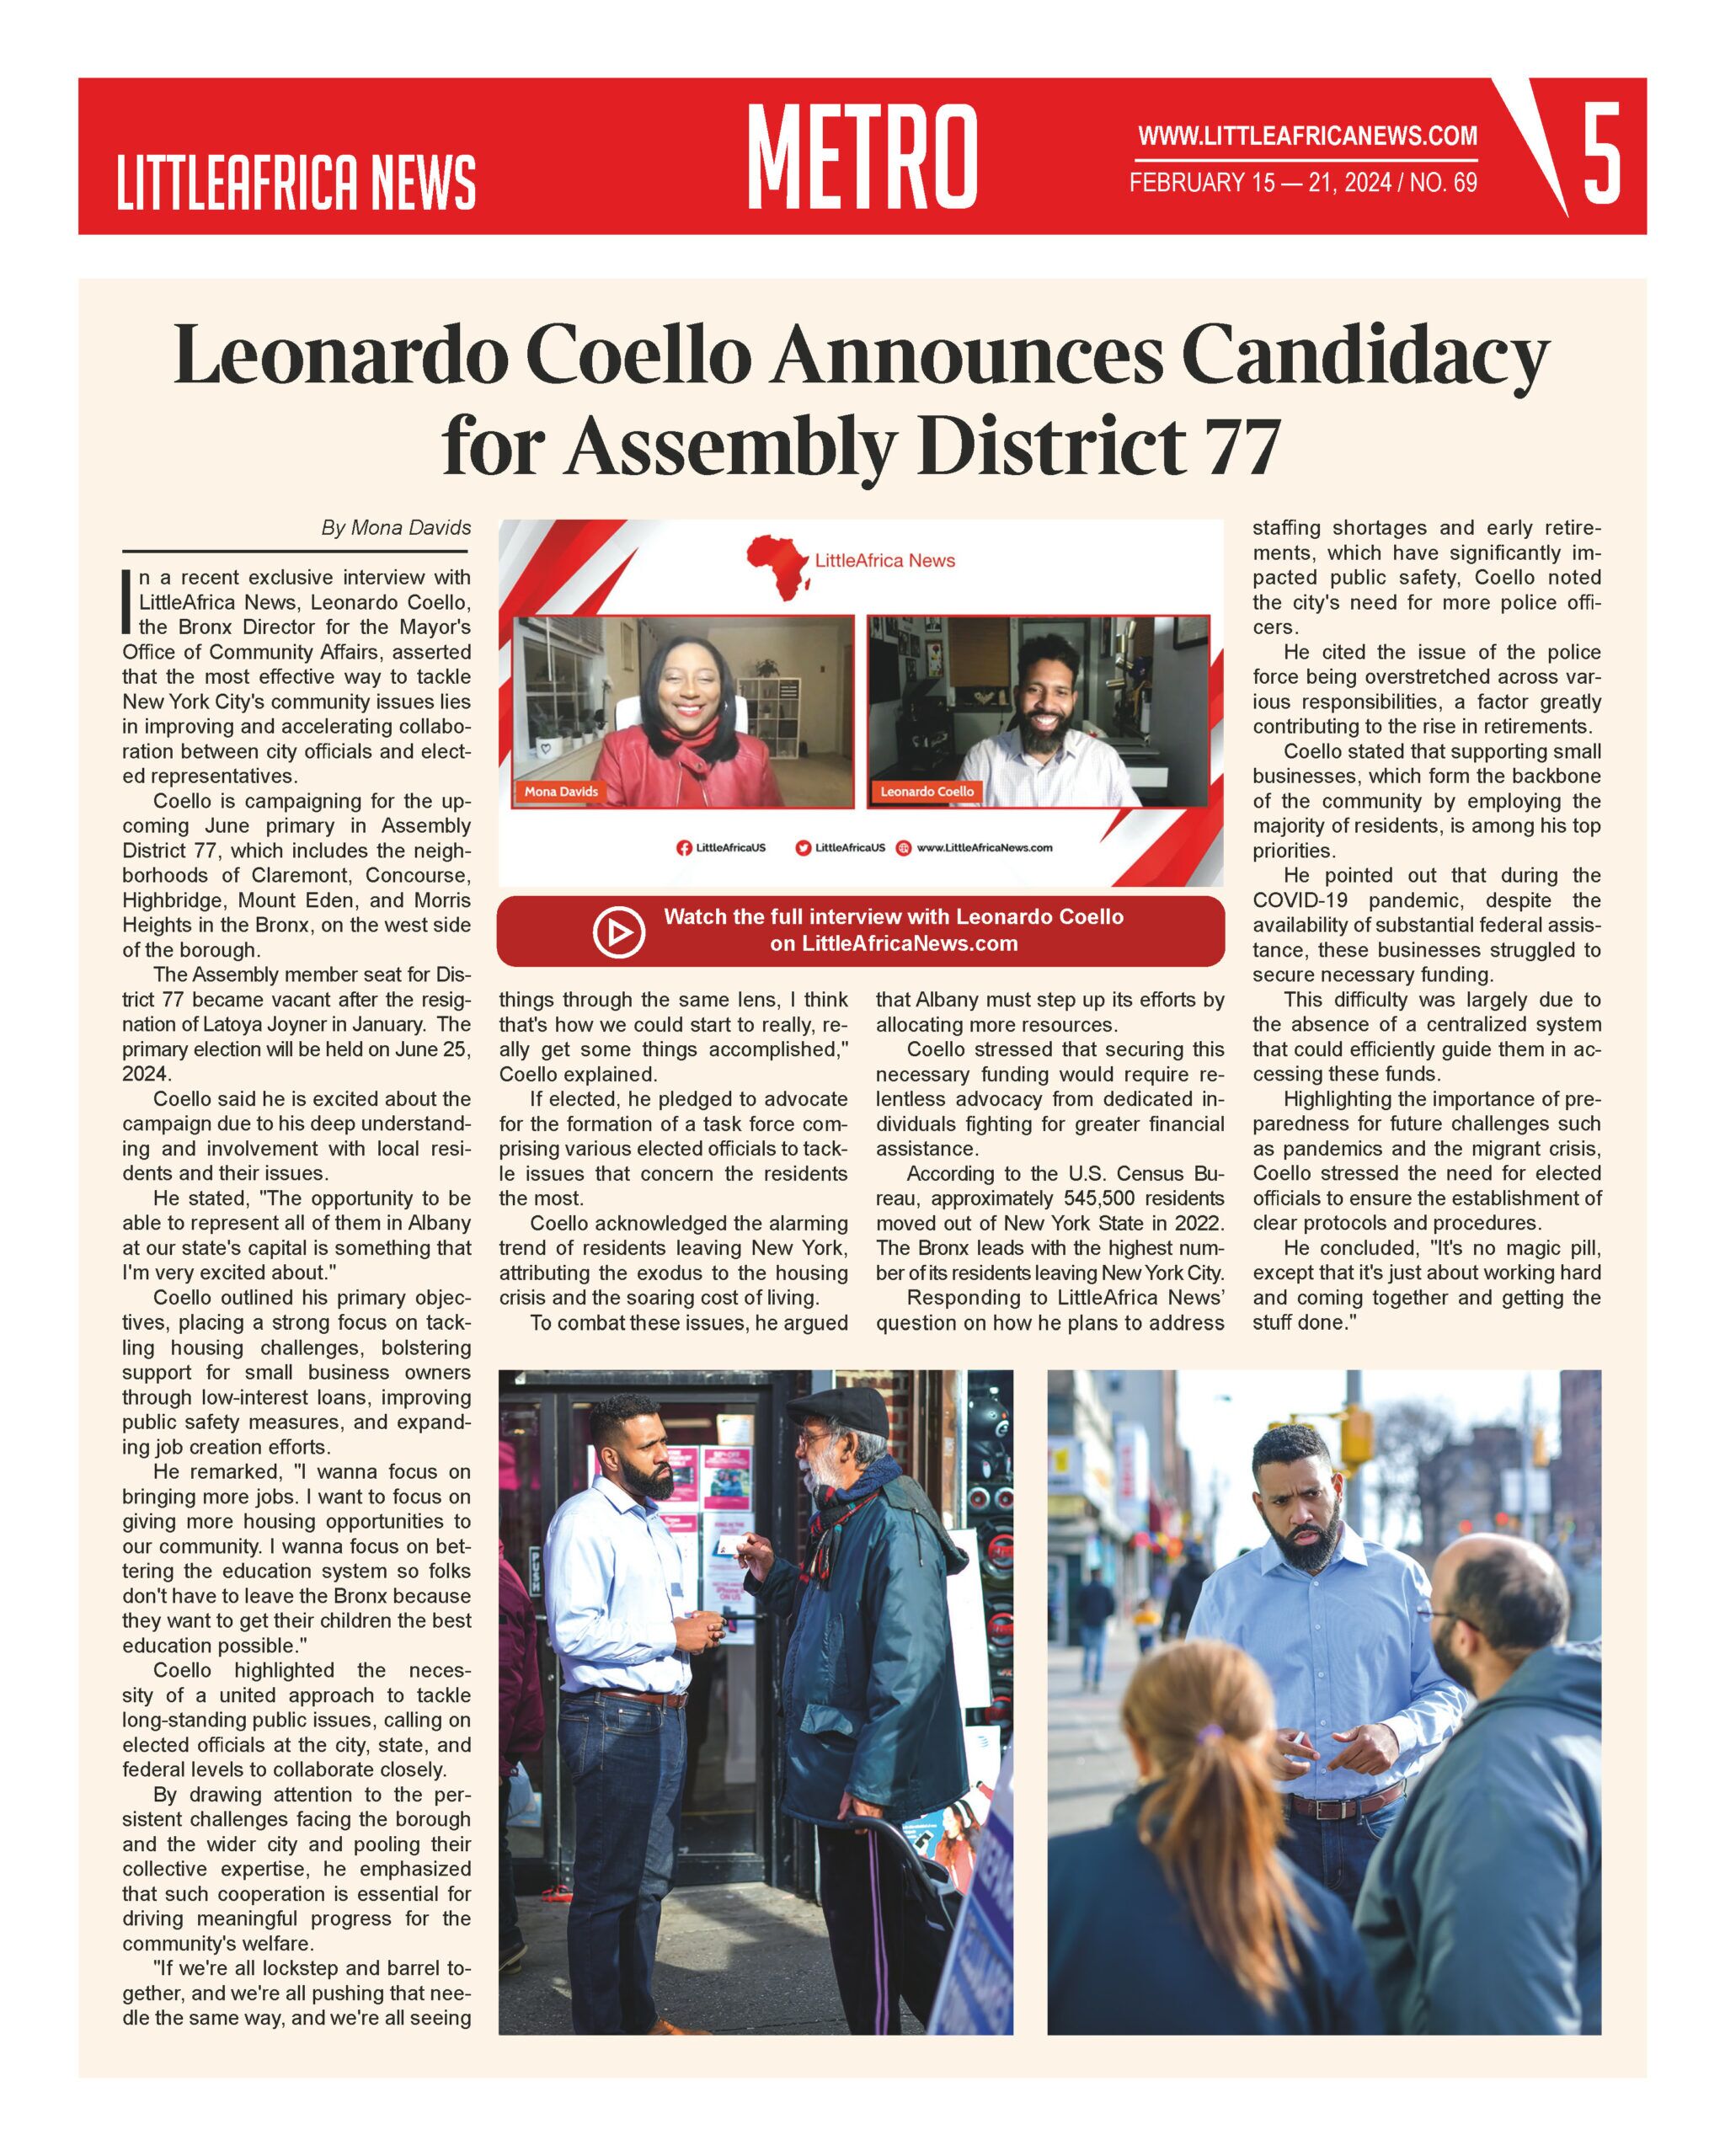 Leonardo Coello Assembly District 77 Candidate Interview-LittleAfrica News